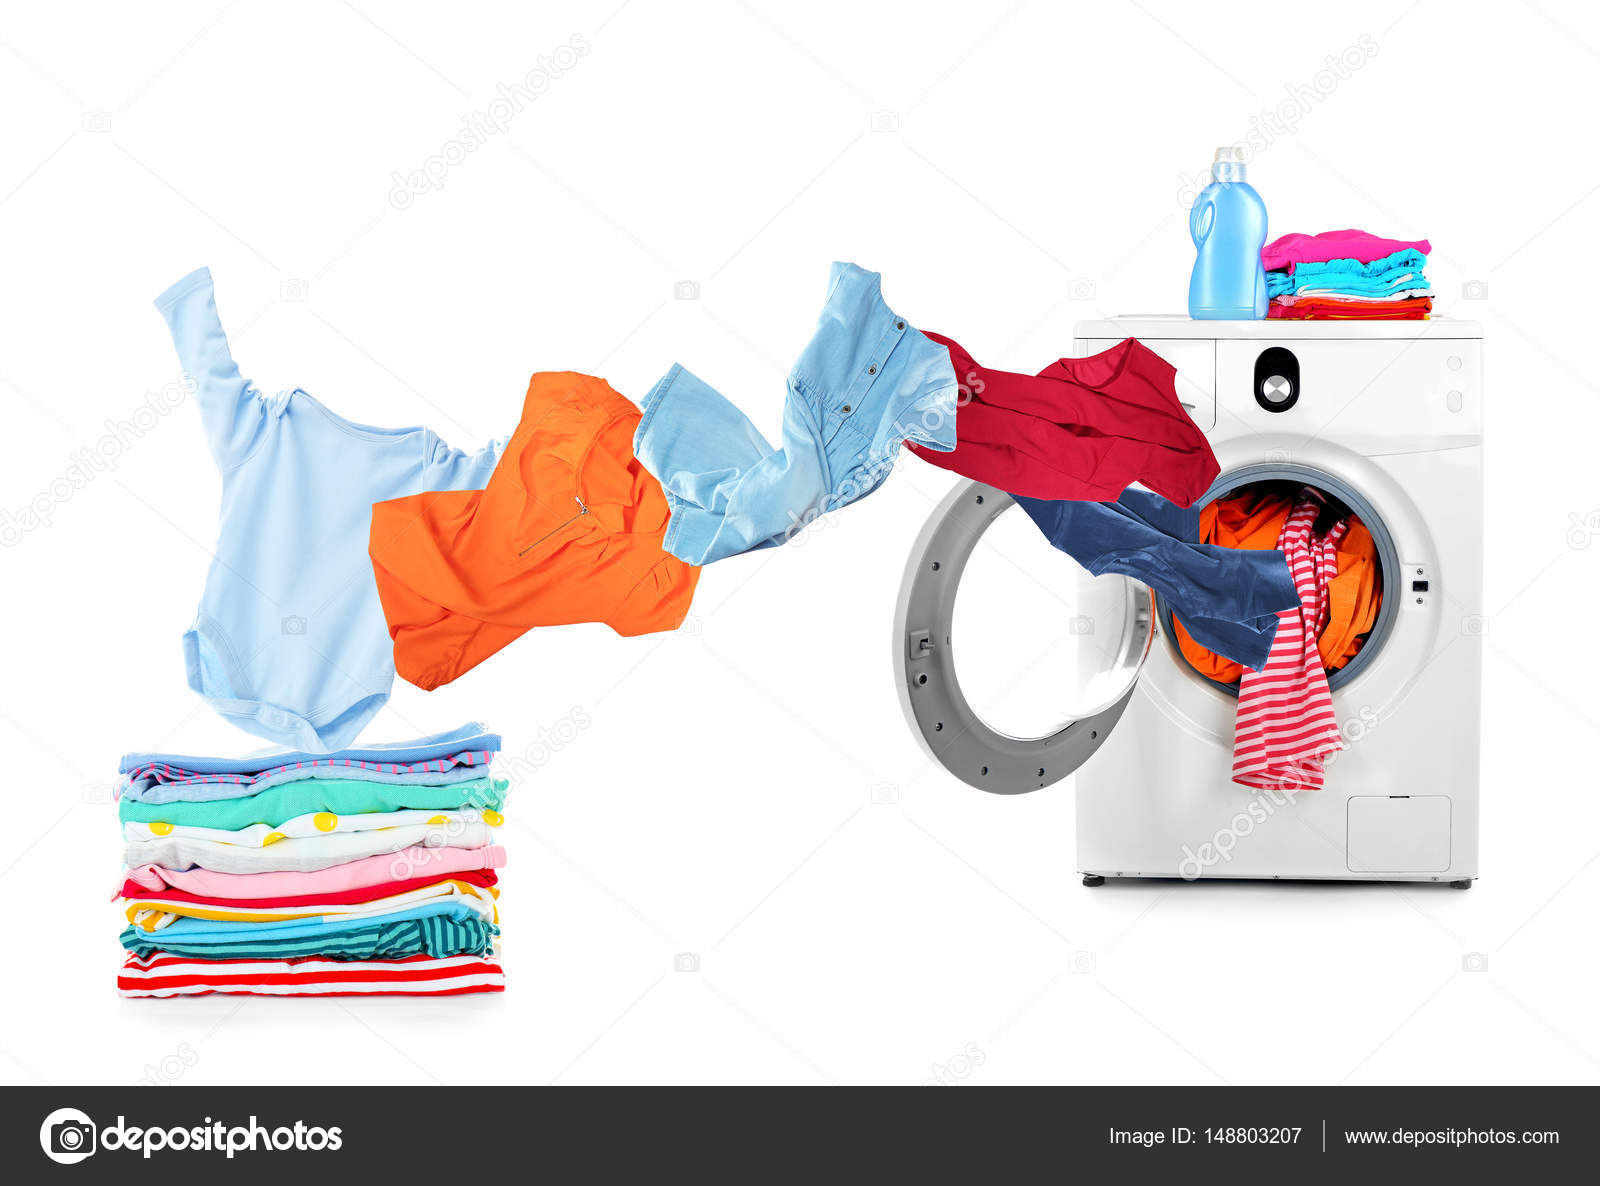 Washing machine and flying clothes Stock Photo by ©belchonock 148803207